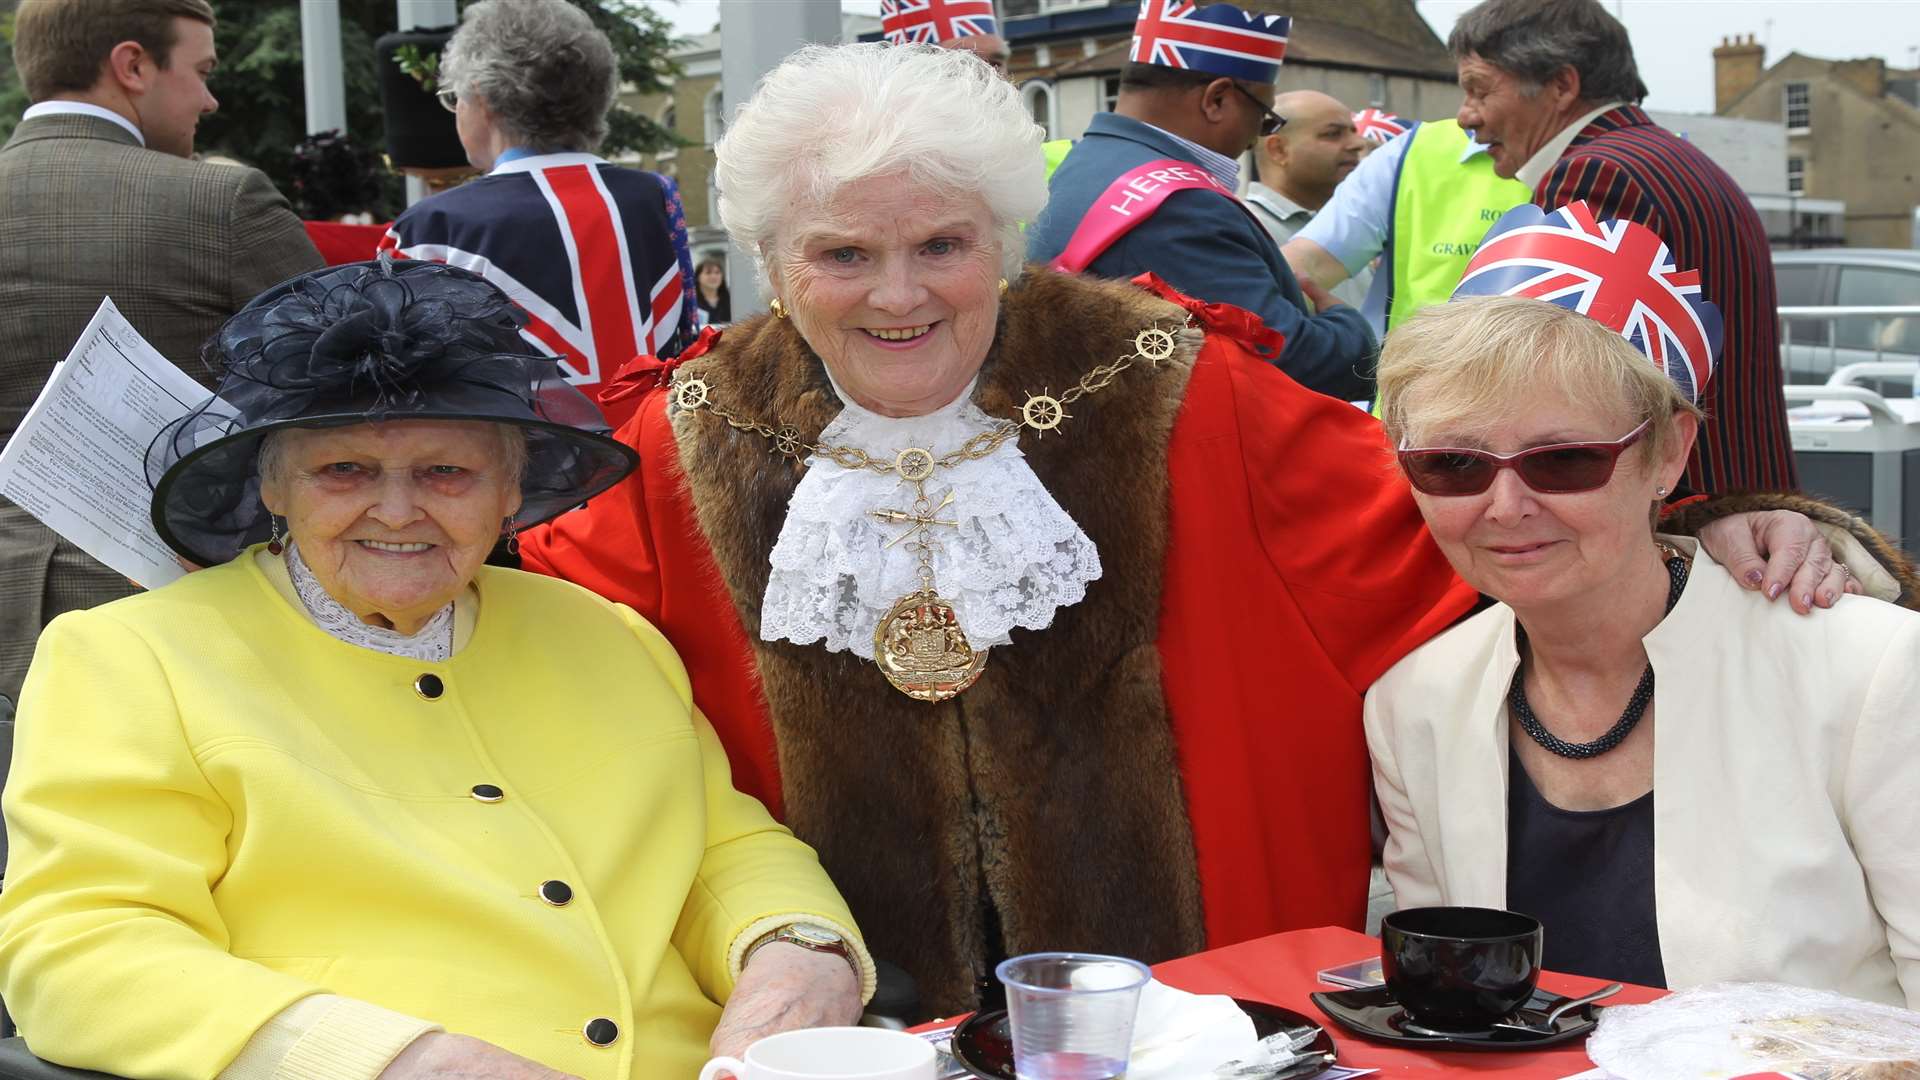 The former mayor with 90-year-old Katheleen Crowley an her daughter Susan Pitcher at the Queen's 90th birthday celebrations. Picture: John Westhrop